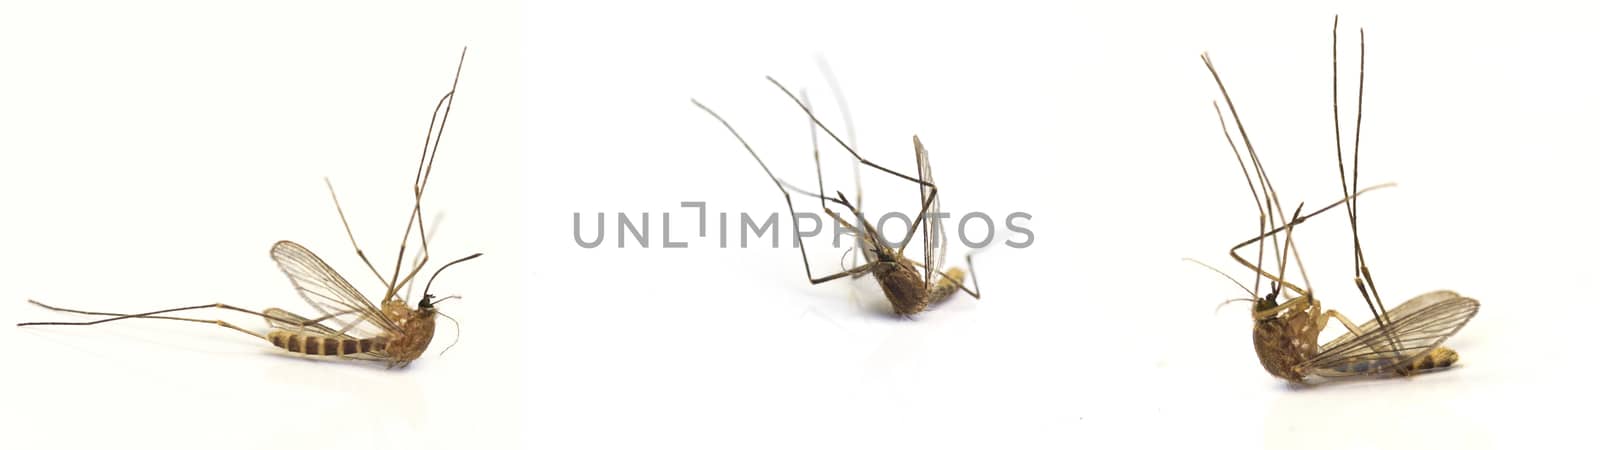 Dead mosquito's on white background